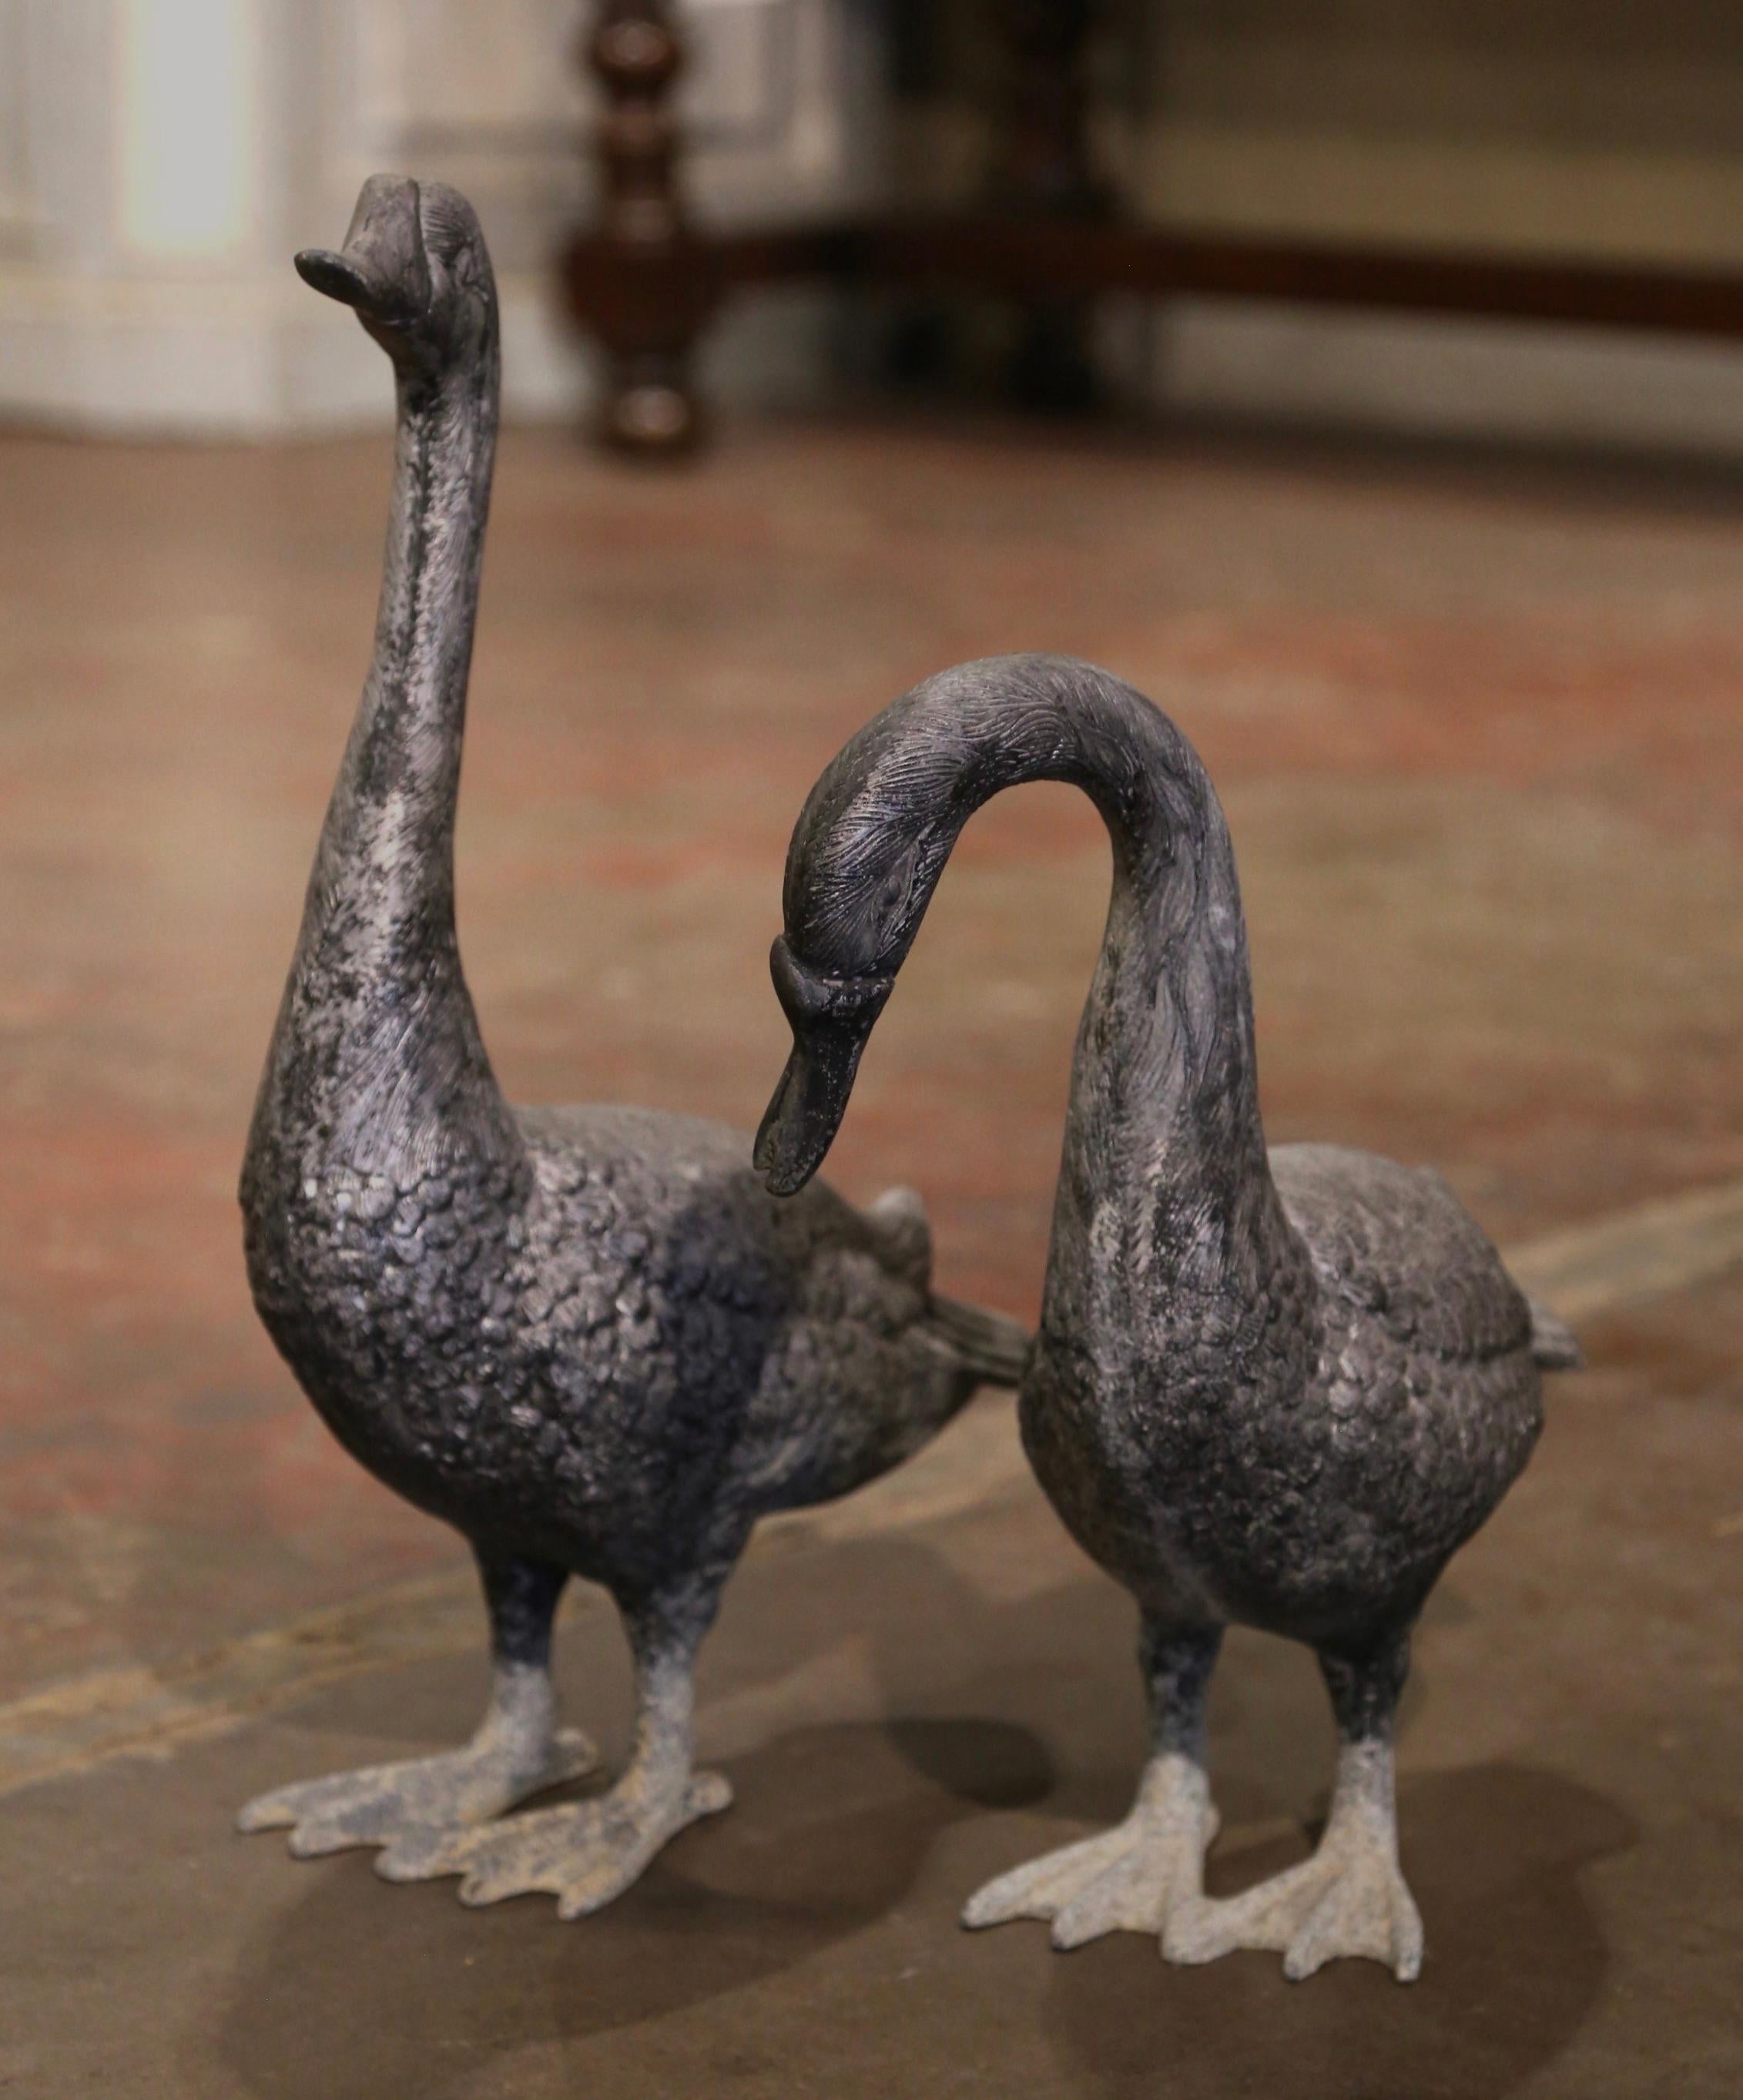 Decorate a patio or garden with these geese garden sculptures. Crafted in France circa 1970 and made of metal, the sculpture depict a pair of geese standing. Both bird decor are in excellent condition and adorn a rich and natural patinated and